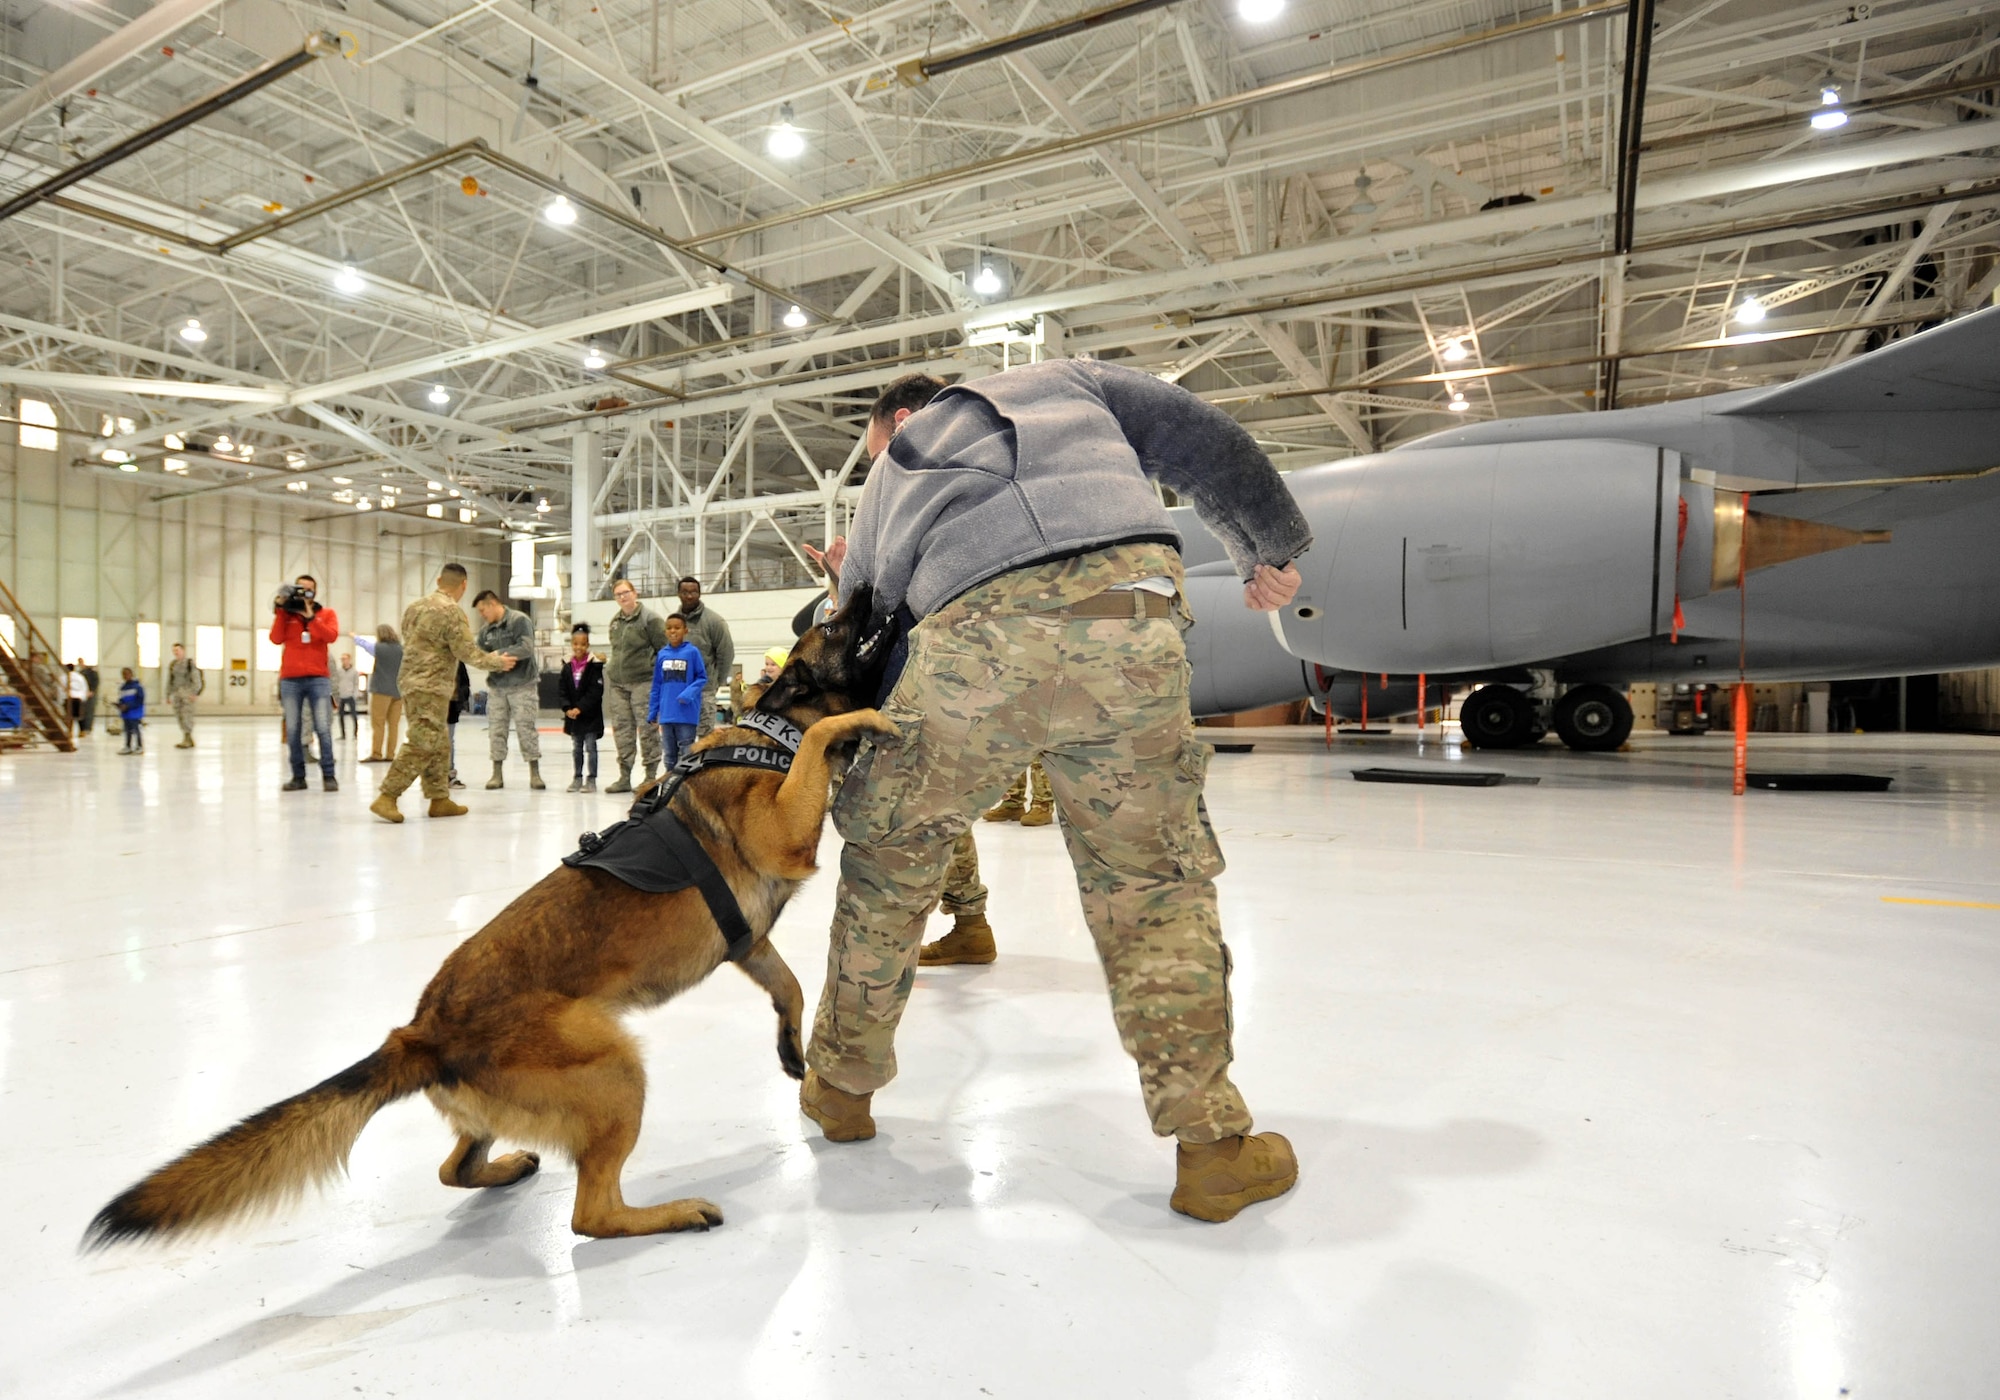 Staff Sgt. Robert Johnson, 22nd Security Forces Squadron military working dog handler, demonstrates how an MWD is trained and how they attack Dec. 19, 2018, at McConnell Air Force Base, Kansas. Sani, a brand new military working dog, was showcased to the children to demonstrate how McConnell uses MWDs to deter criminals and how security forces can apprehend those breaking the law. (U.S. Air Force photo by Staff Sgt. David Bernal Del Agua)